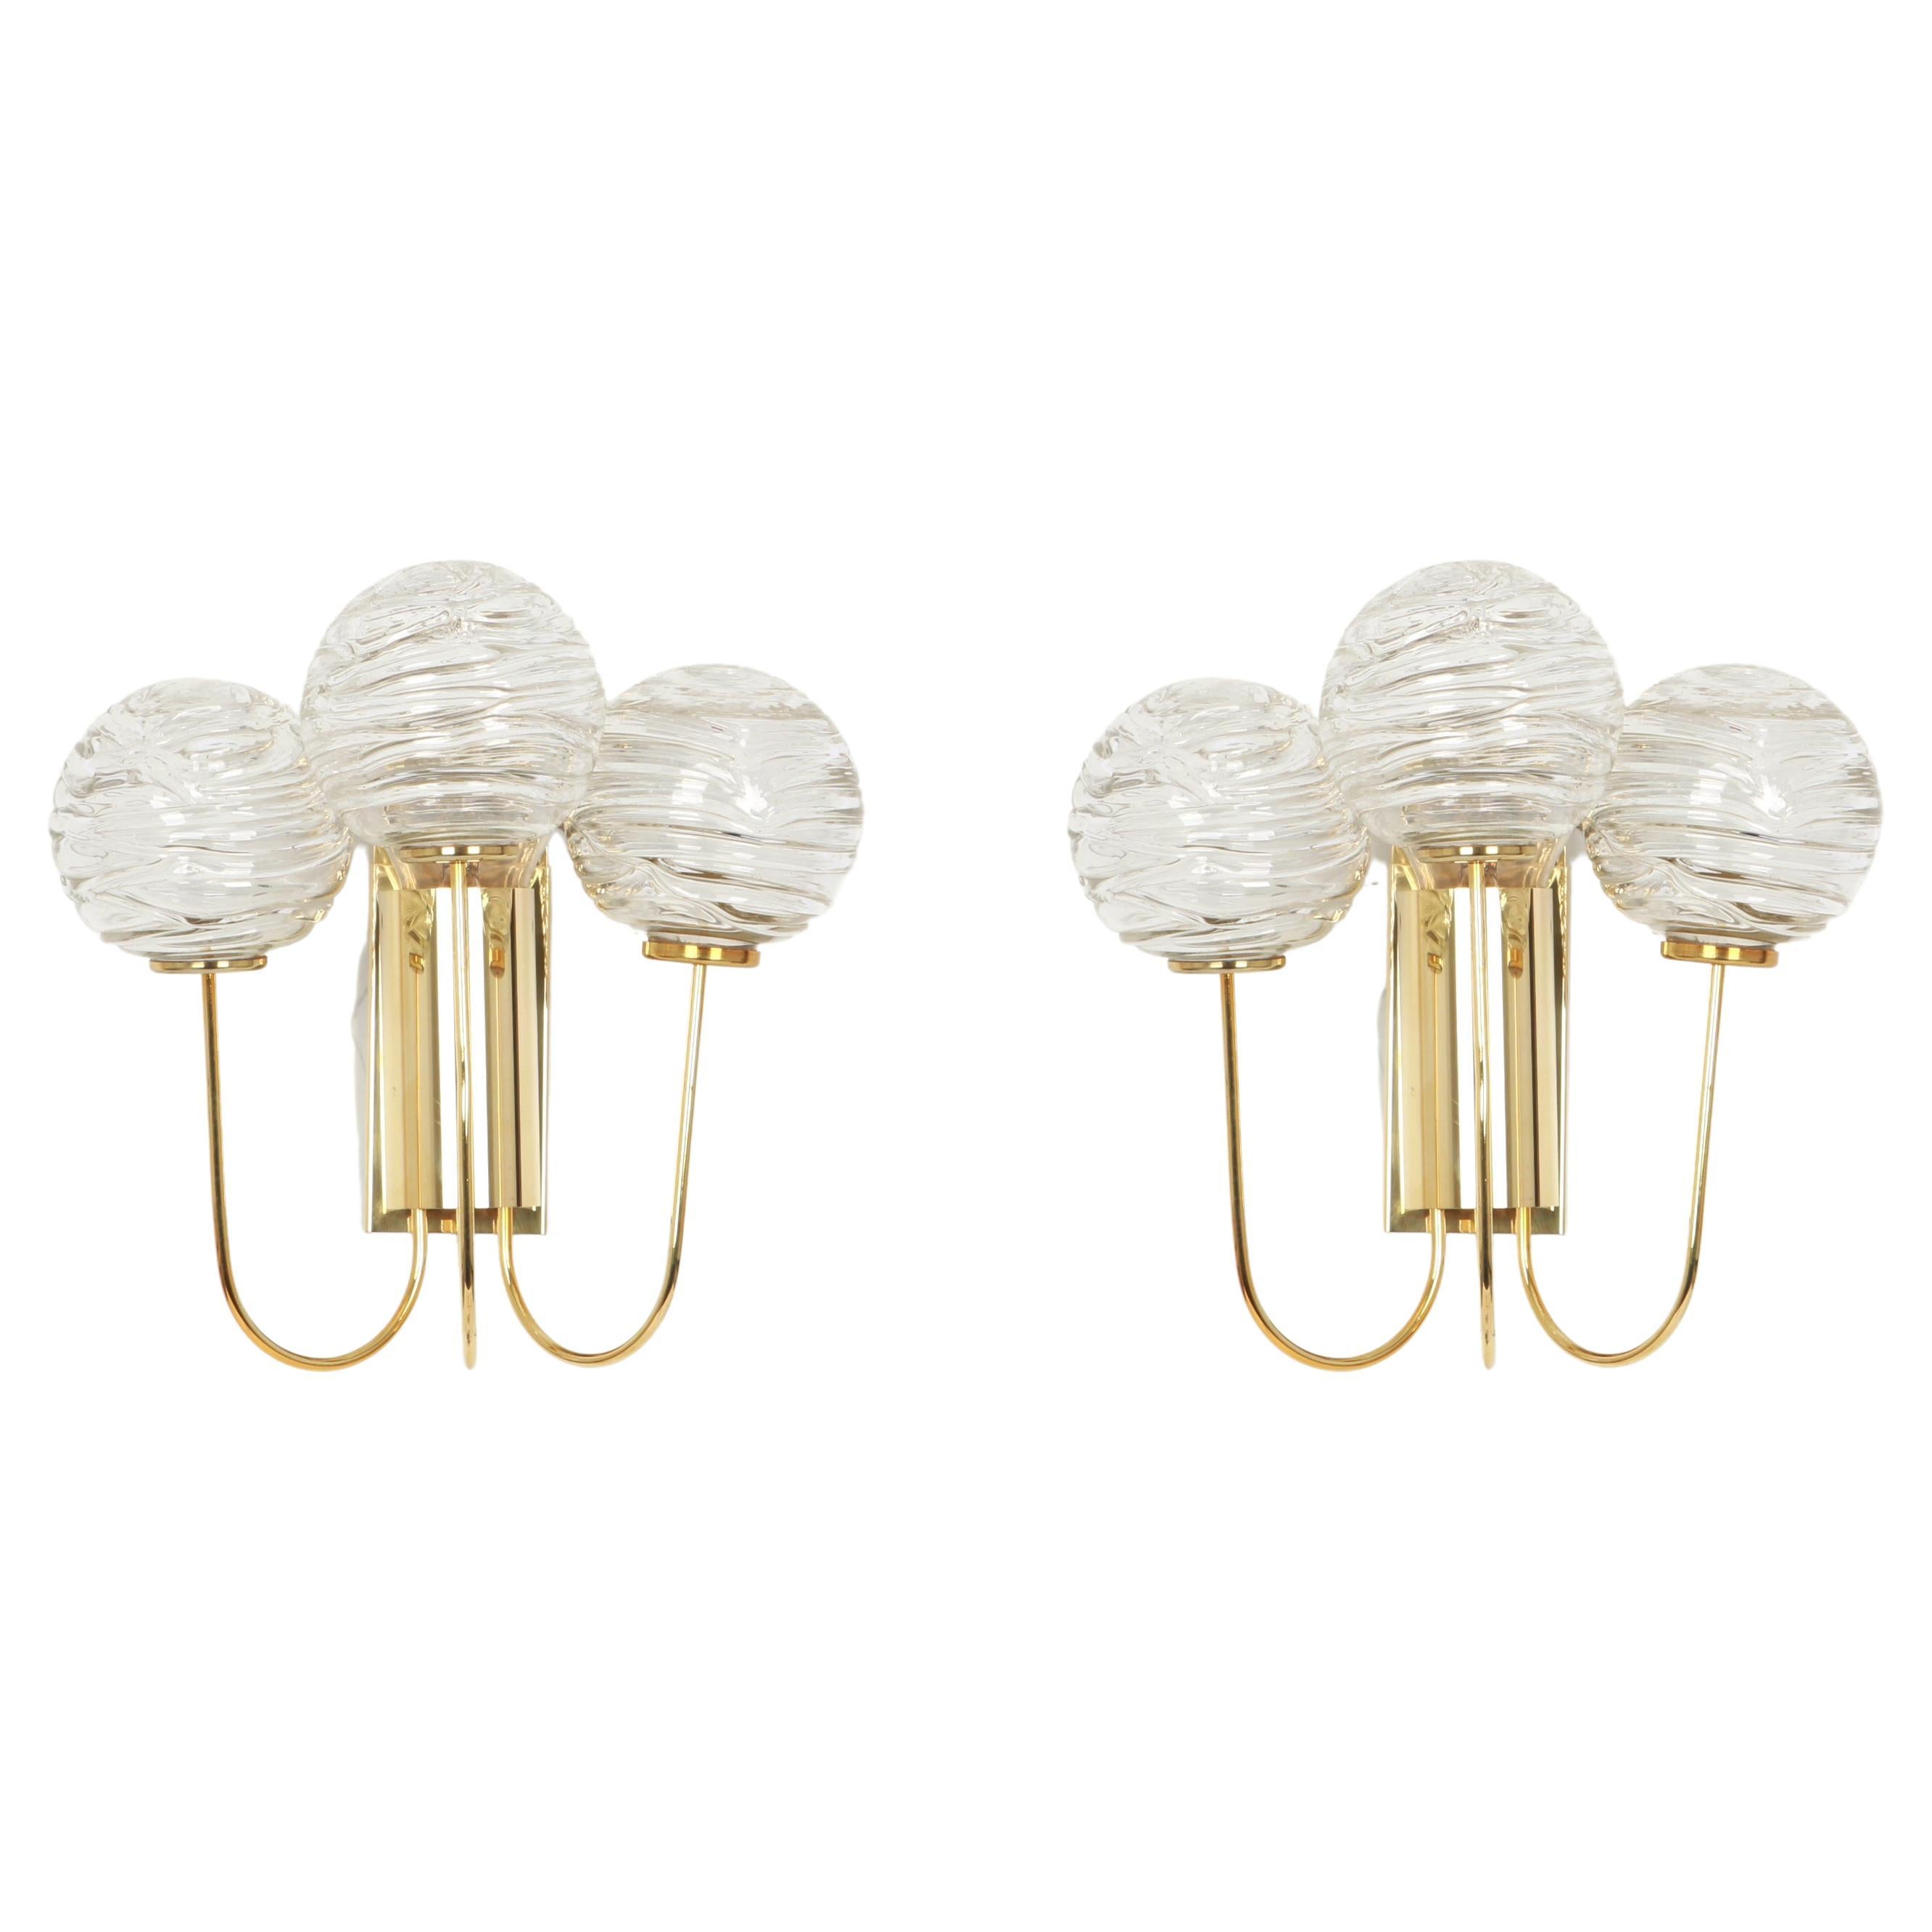 Pair of Rare Sputnik Brass and Murano Glass Wall Sconces by Doria, Germany, 1960 For Sale